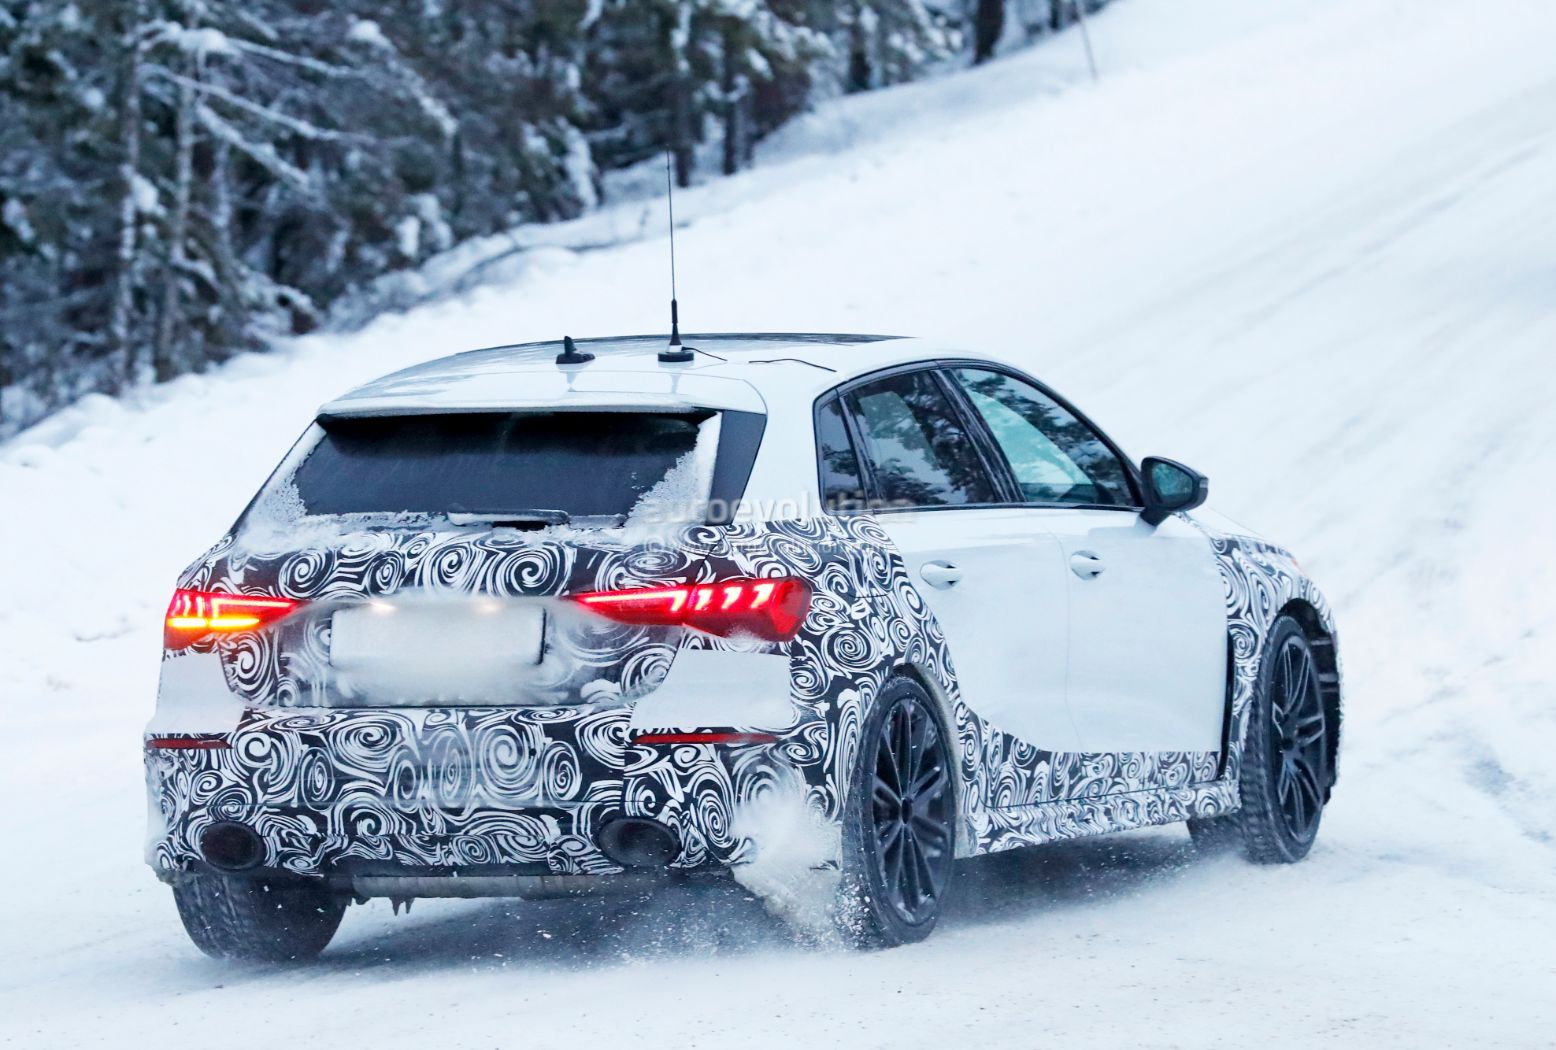 Is this the Evo? Get ready for an even hotter Audi RS6